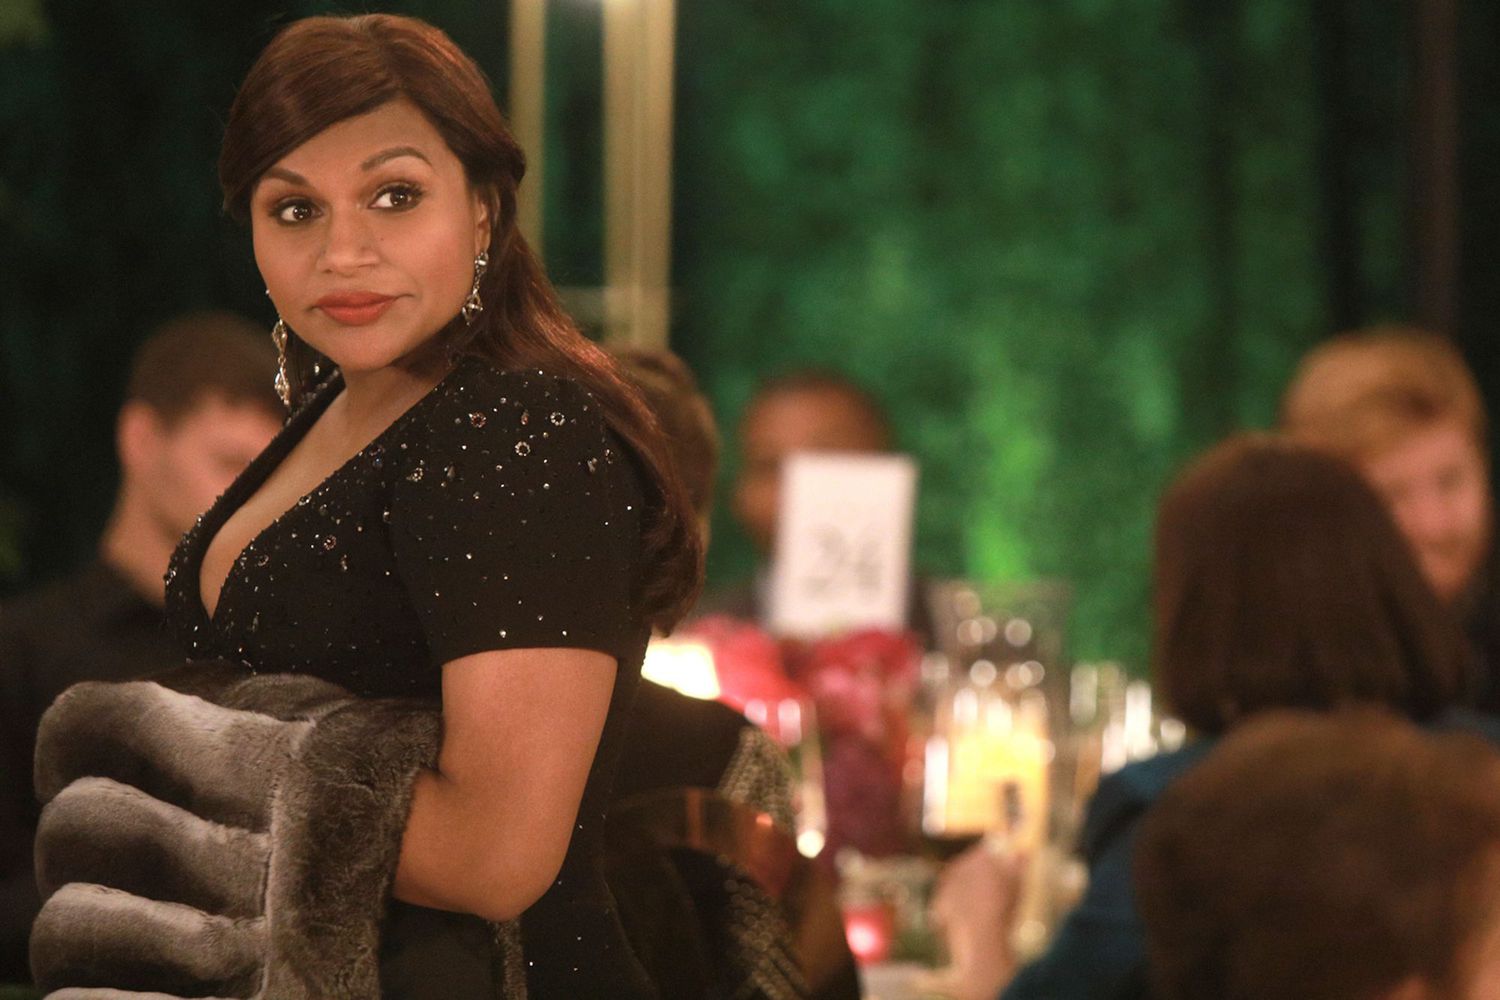 Danny and Mindy end up together, The Mindy Project